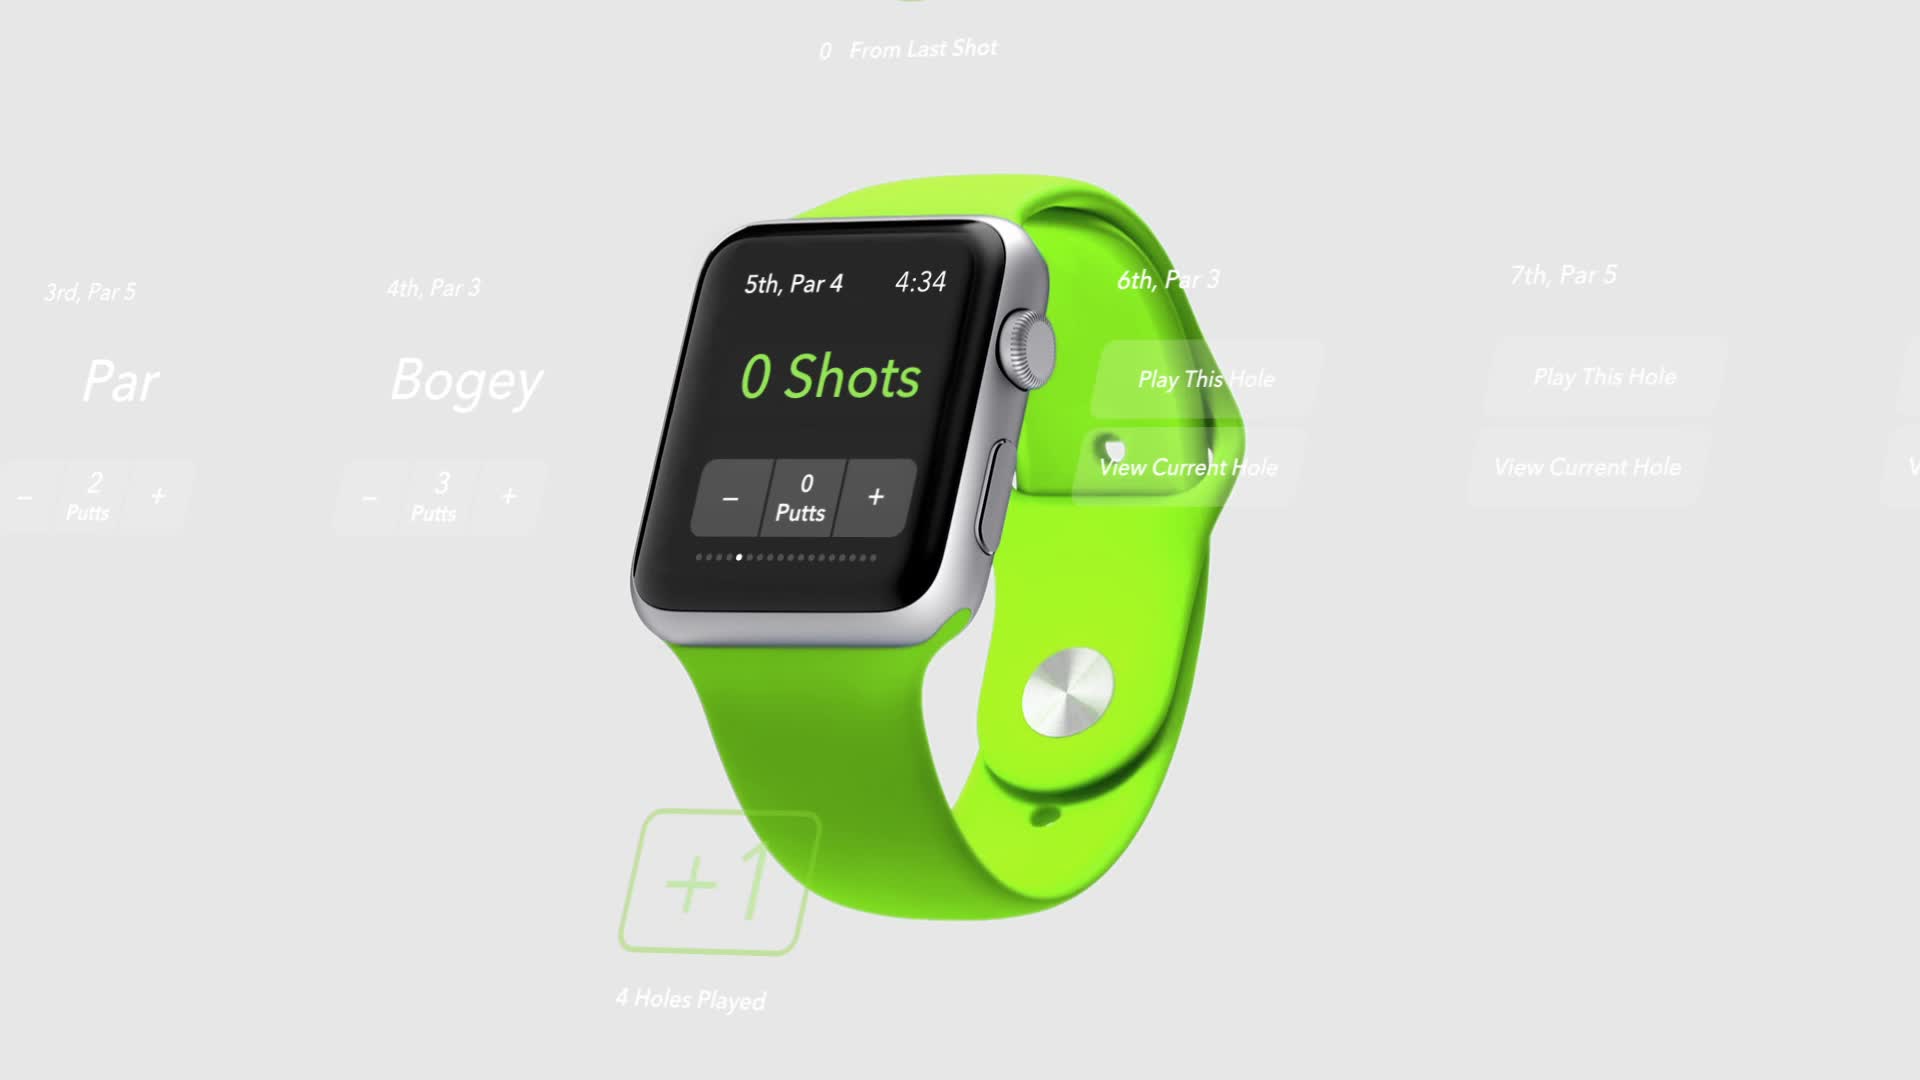 User Flow for Arccos on the Apple Watch